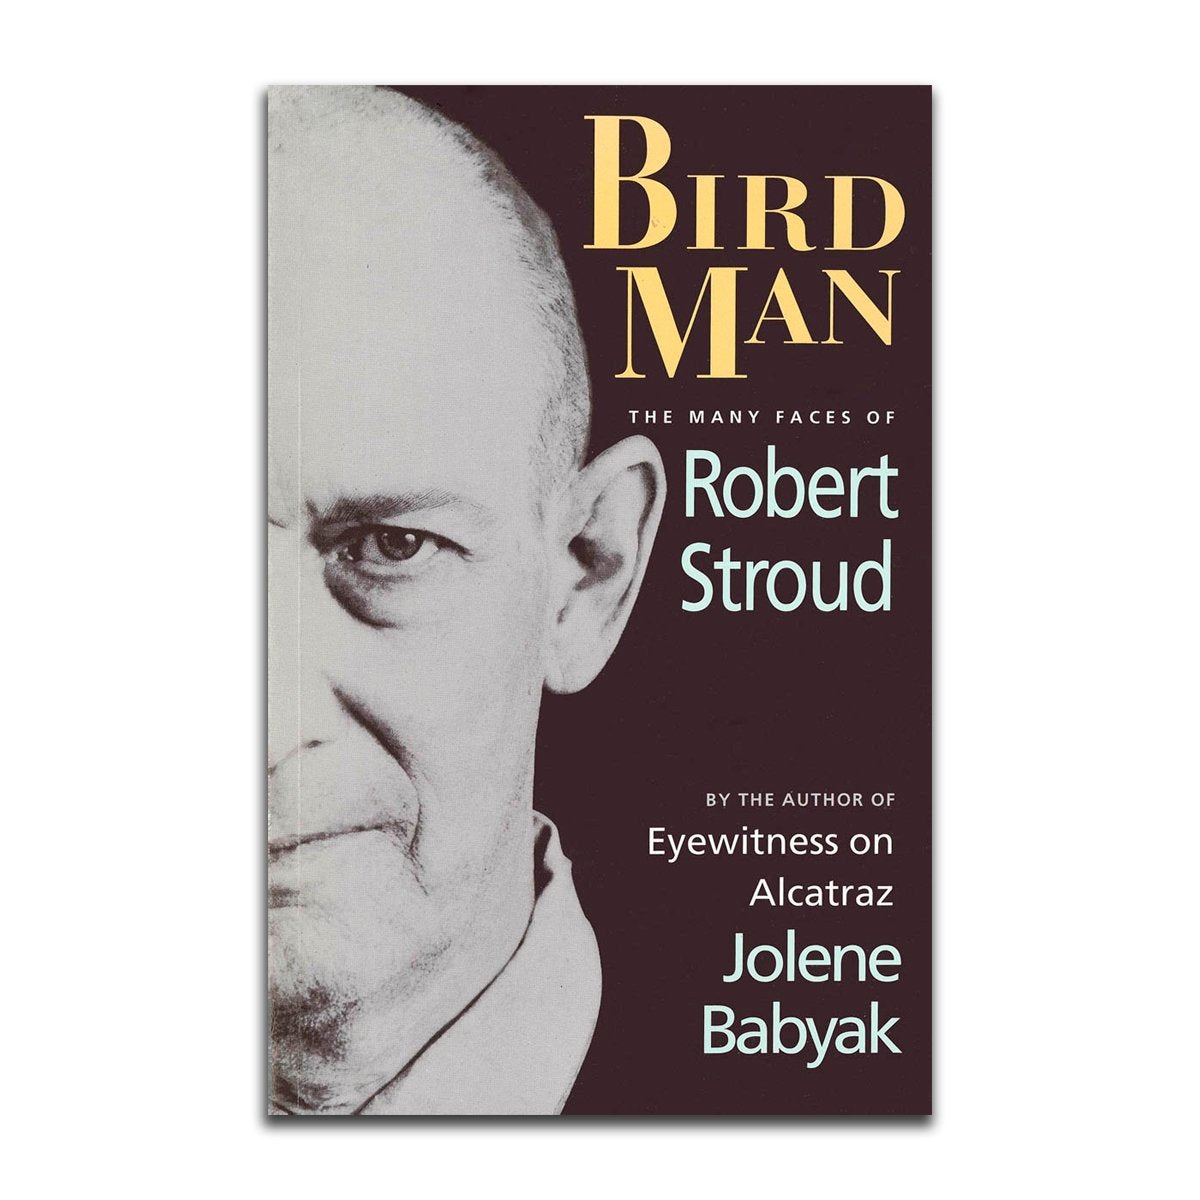 Bird Man the Many Faces of Robert Stroud book by Jolene Babyak, biography of infamous former US Penitentiary Alcatraz inmate.